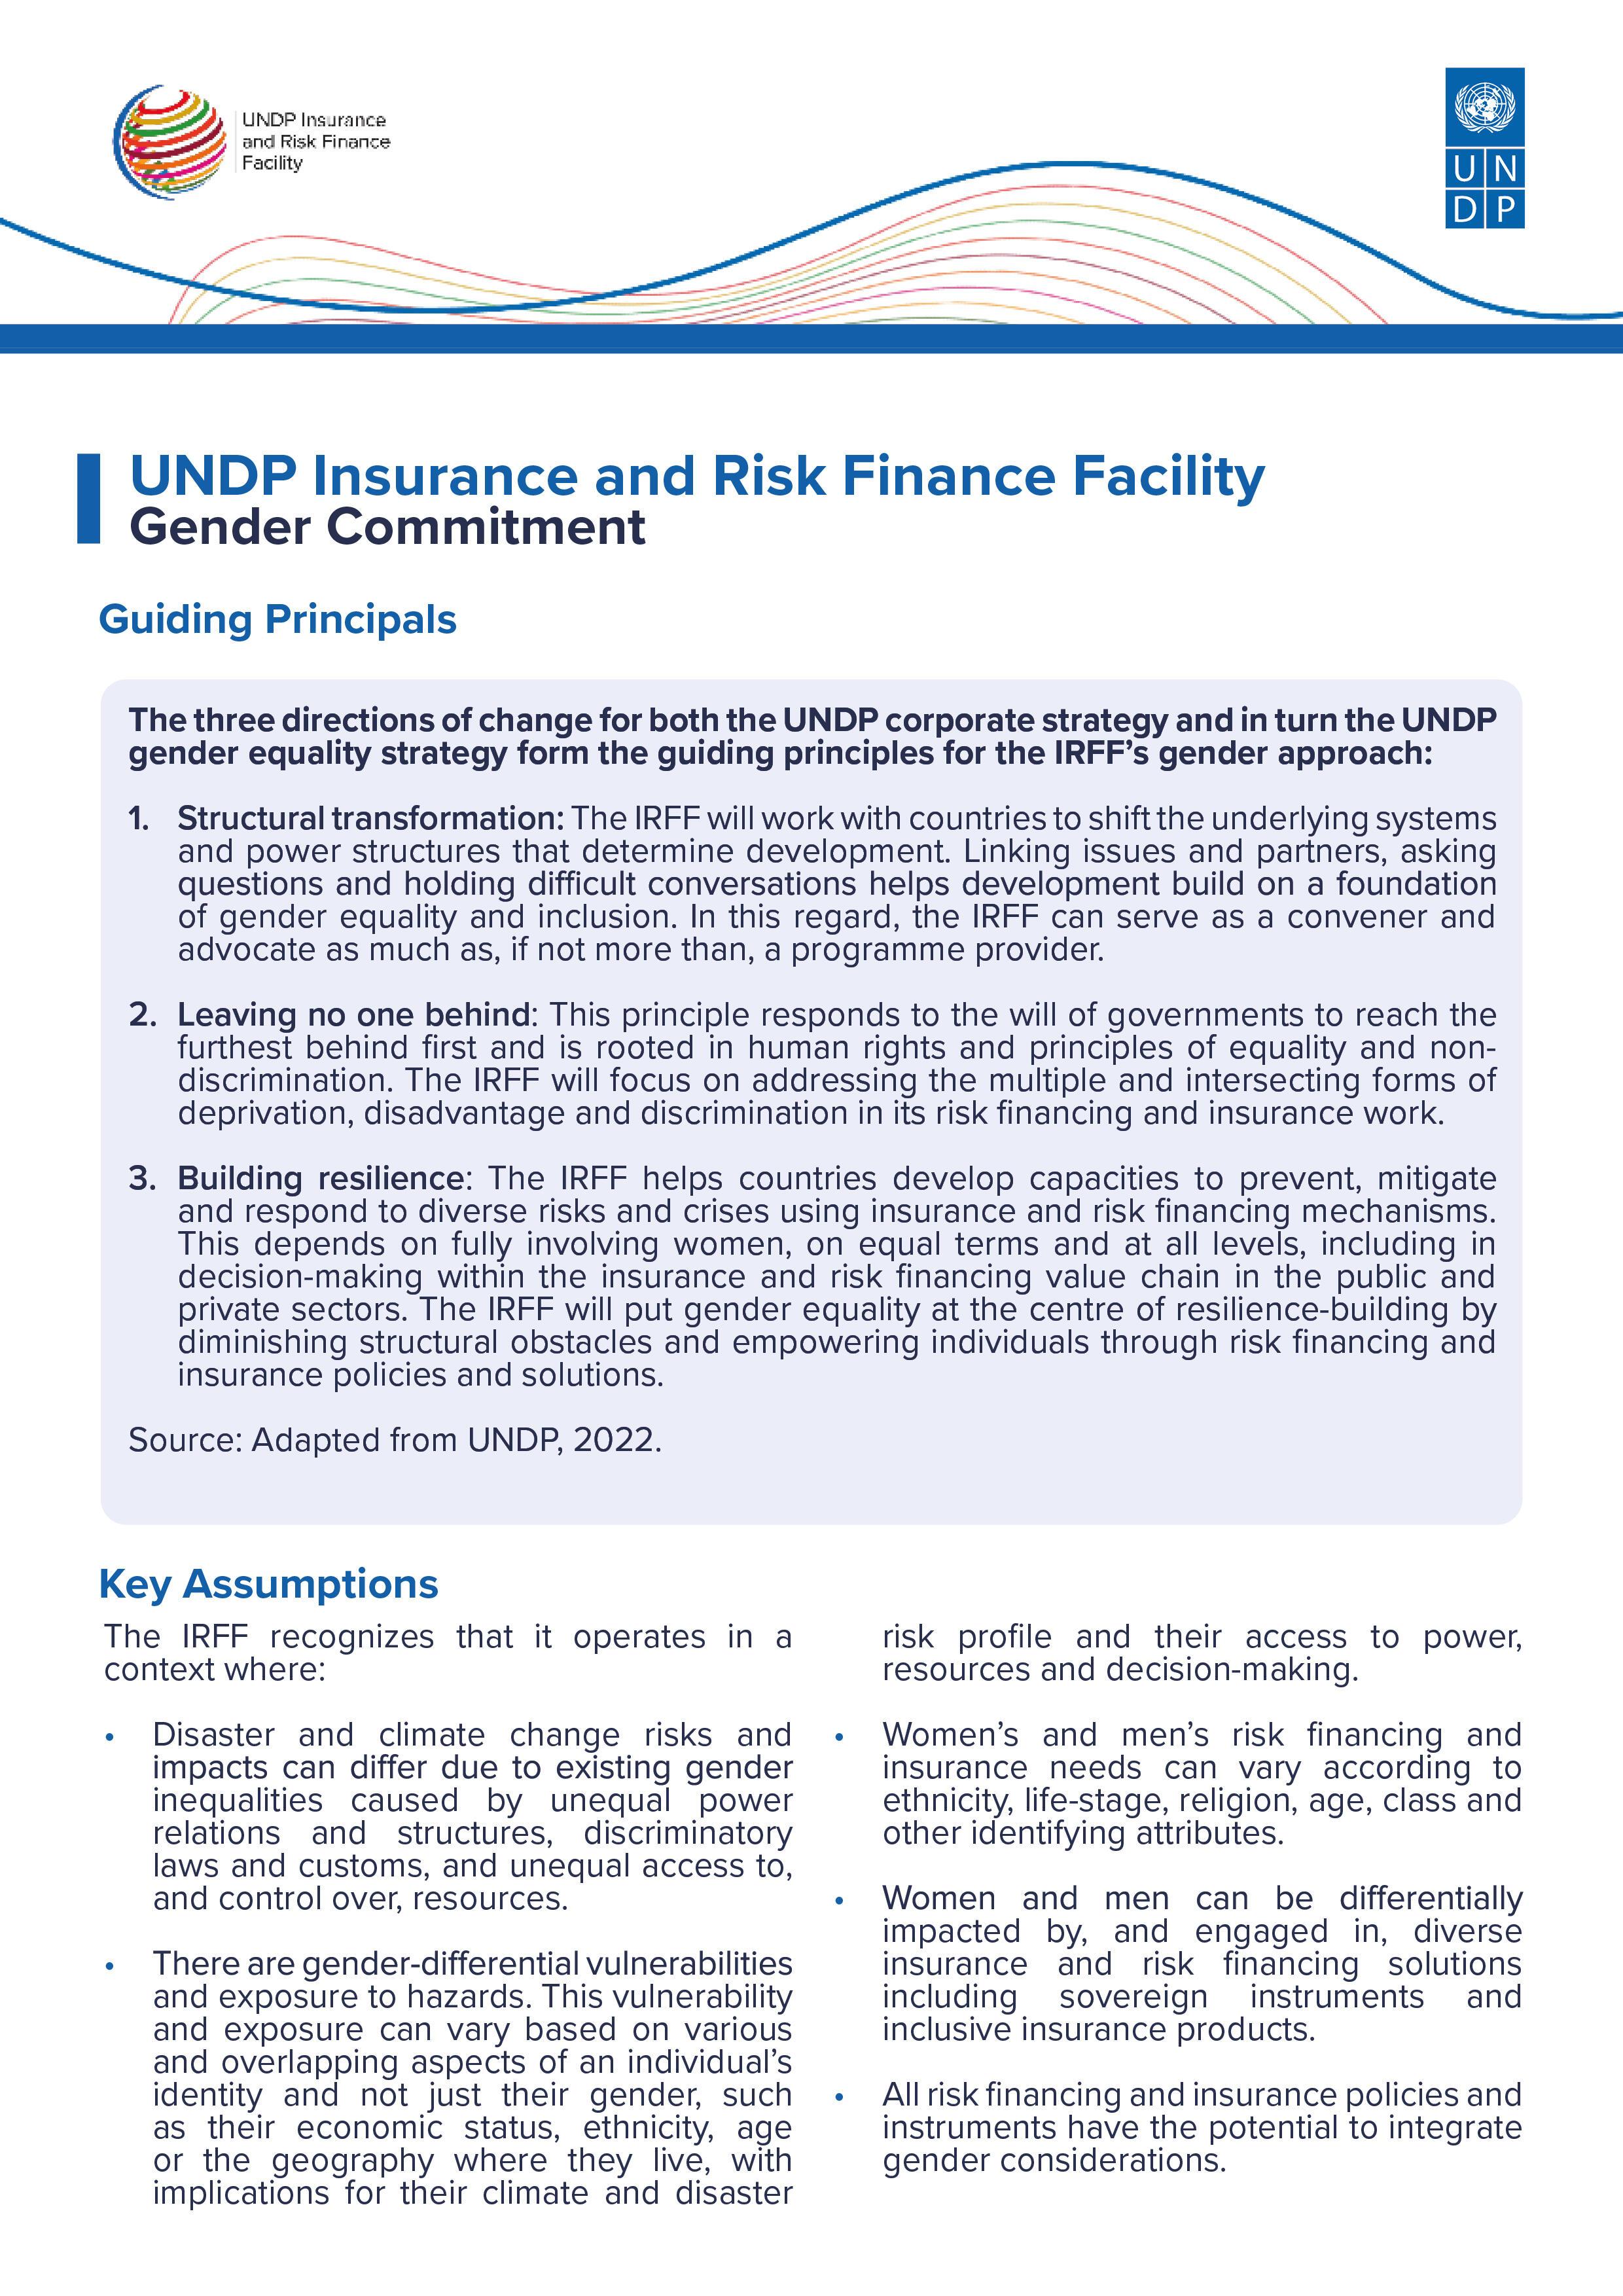 UNDP Insurance and Risk Finance Facility Gender Commitment